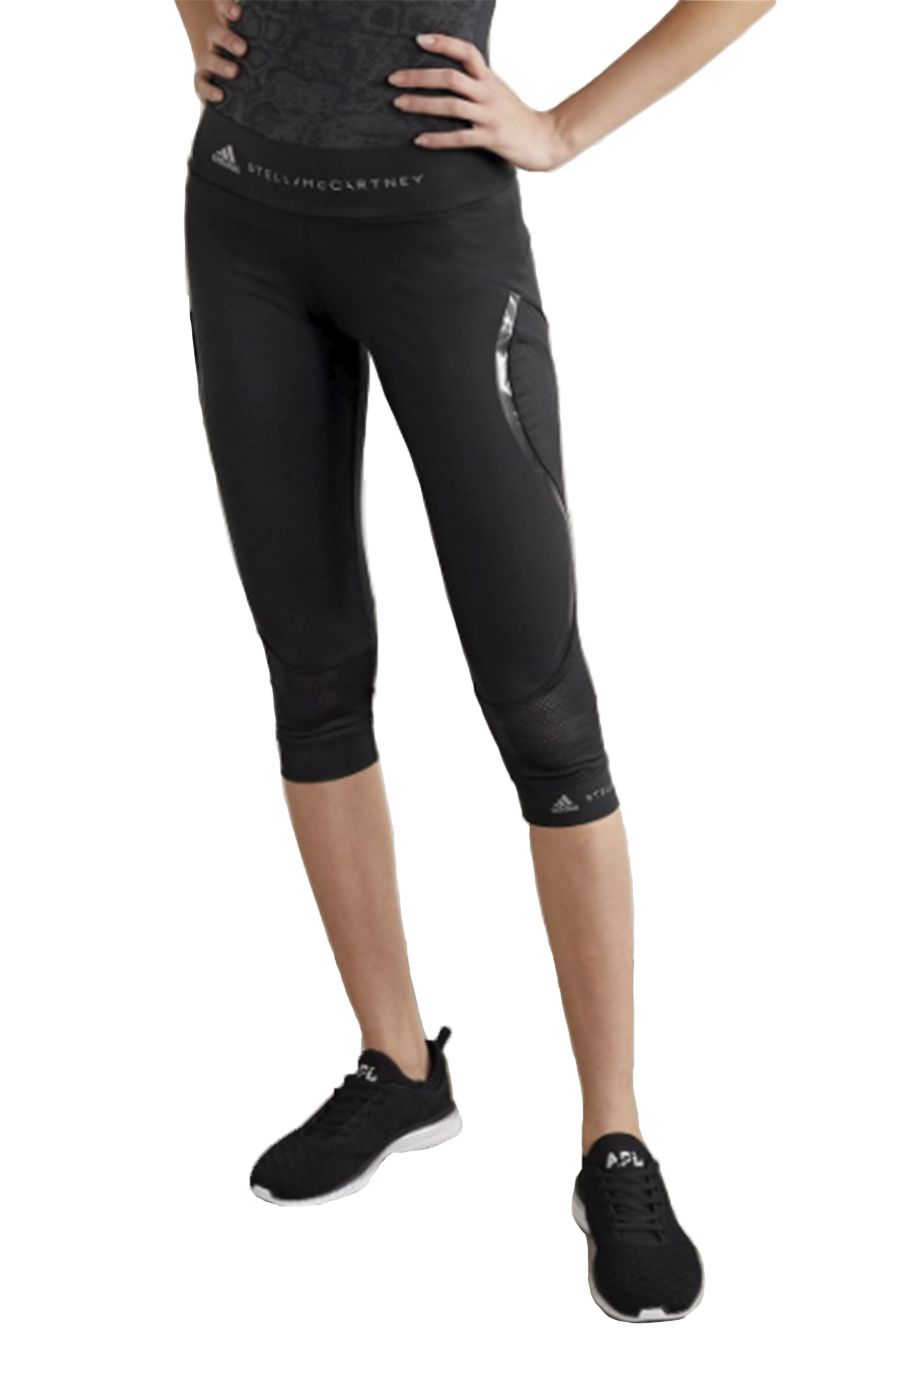 15 Petite Workout Leggings for Every 